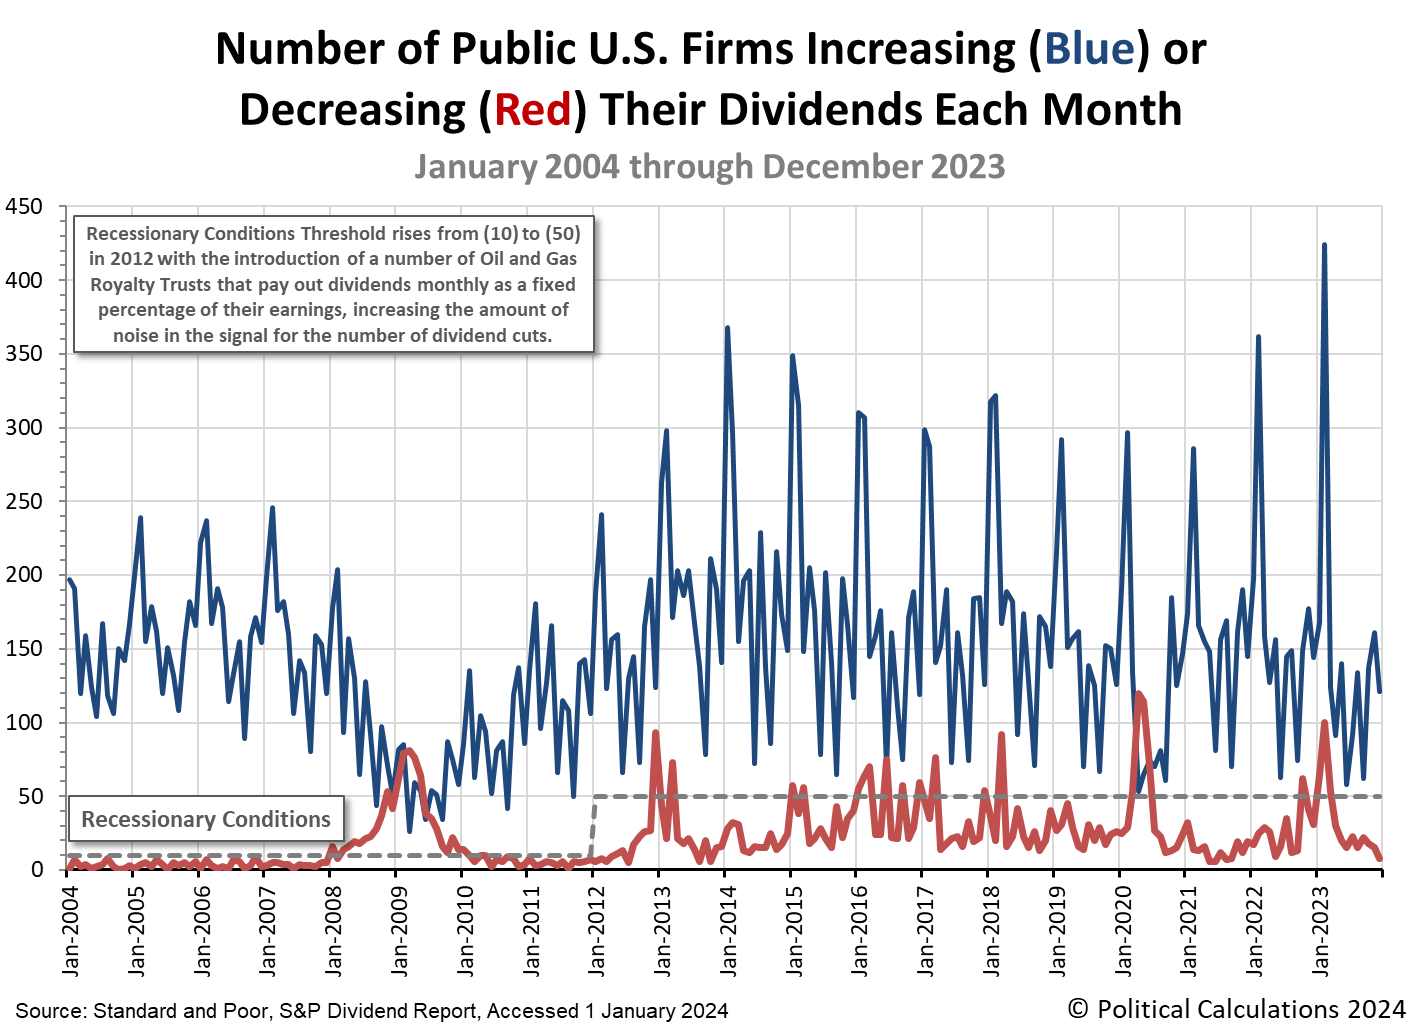 Number of Public U.S. Firms Increasing or Decreasing Their Dividends Each Month, January 2004 - December 2023